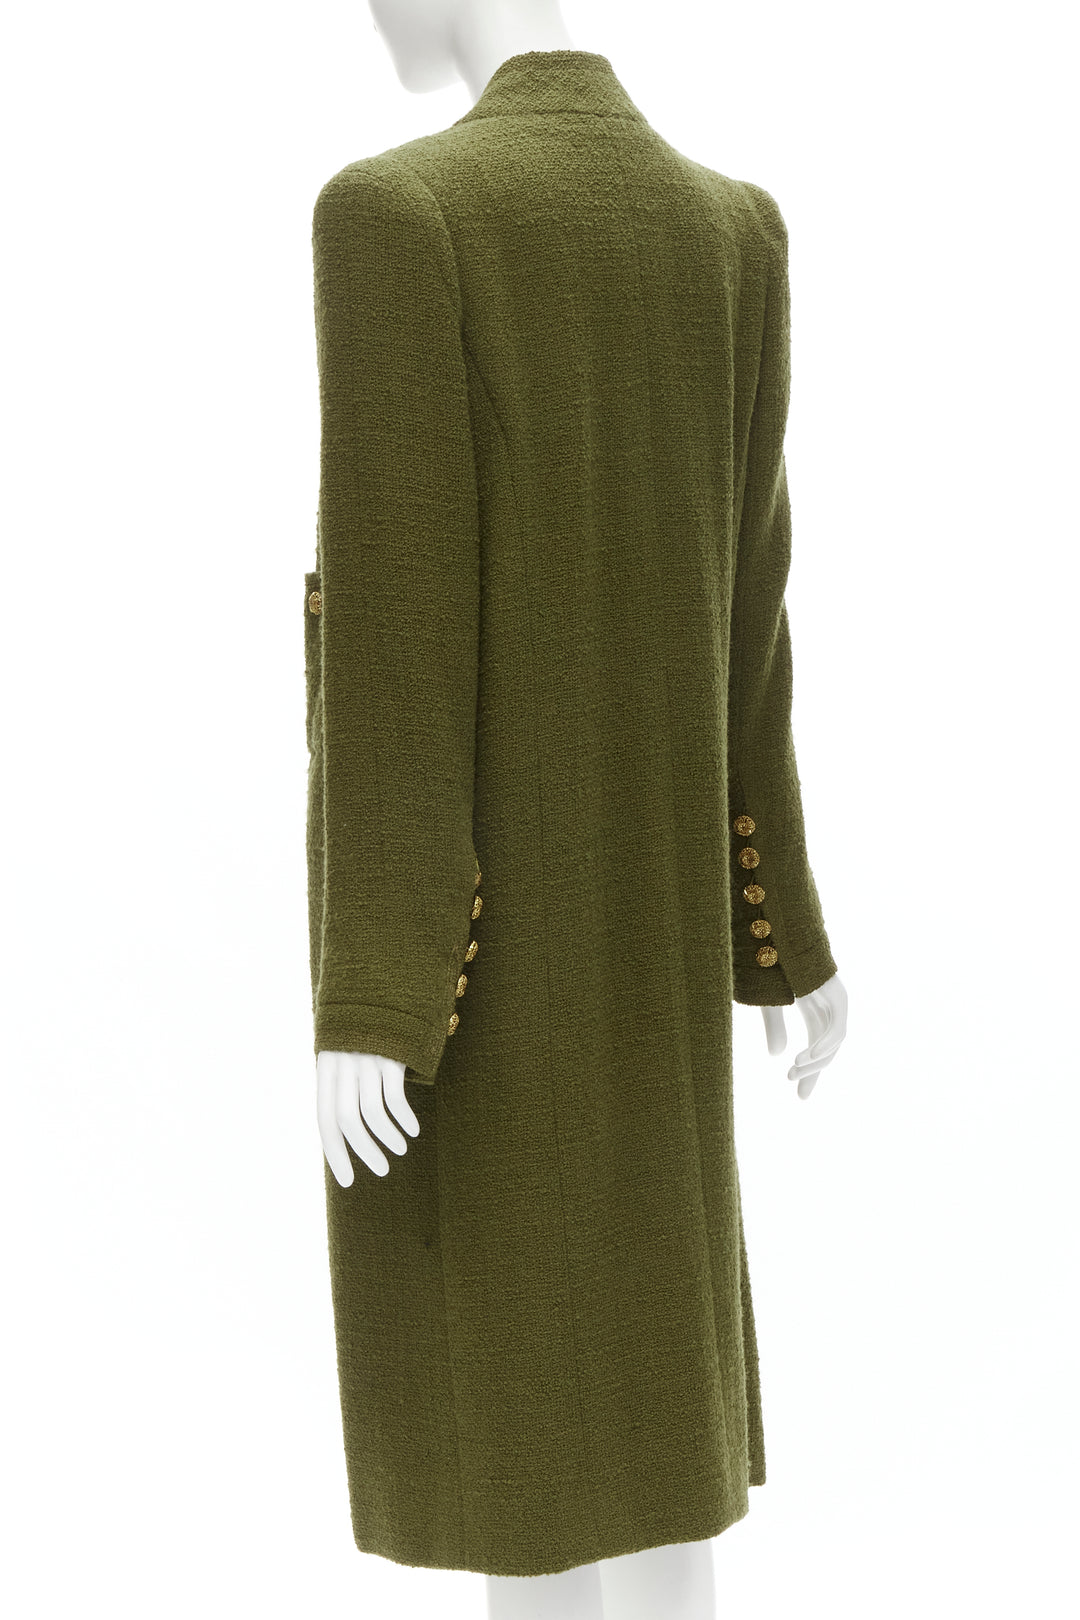 CHANEL COUTURE 96A green tweed gold filigree floral button long coat US6 M